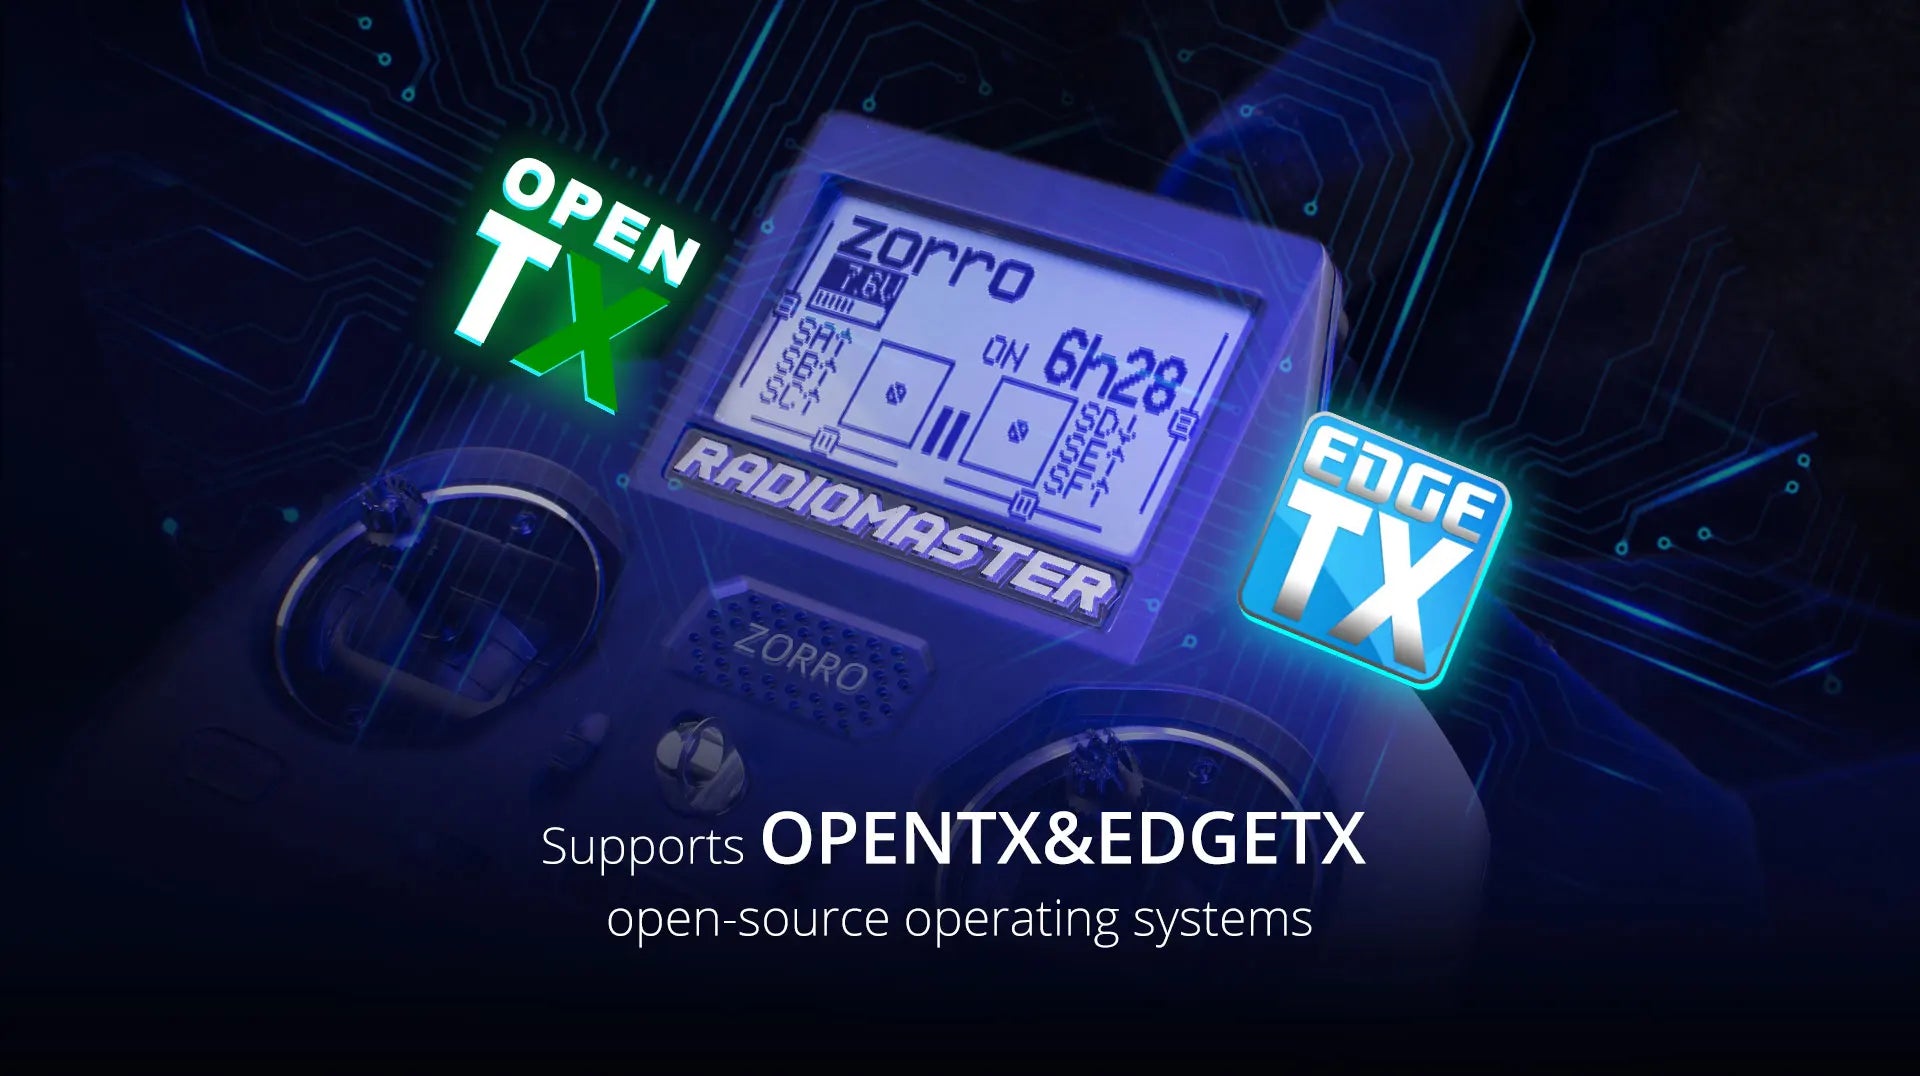 QN m Supports OPENTX&EDGETX open-source operating